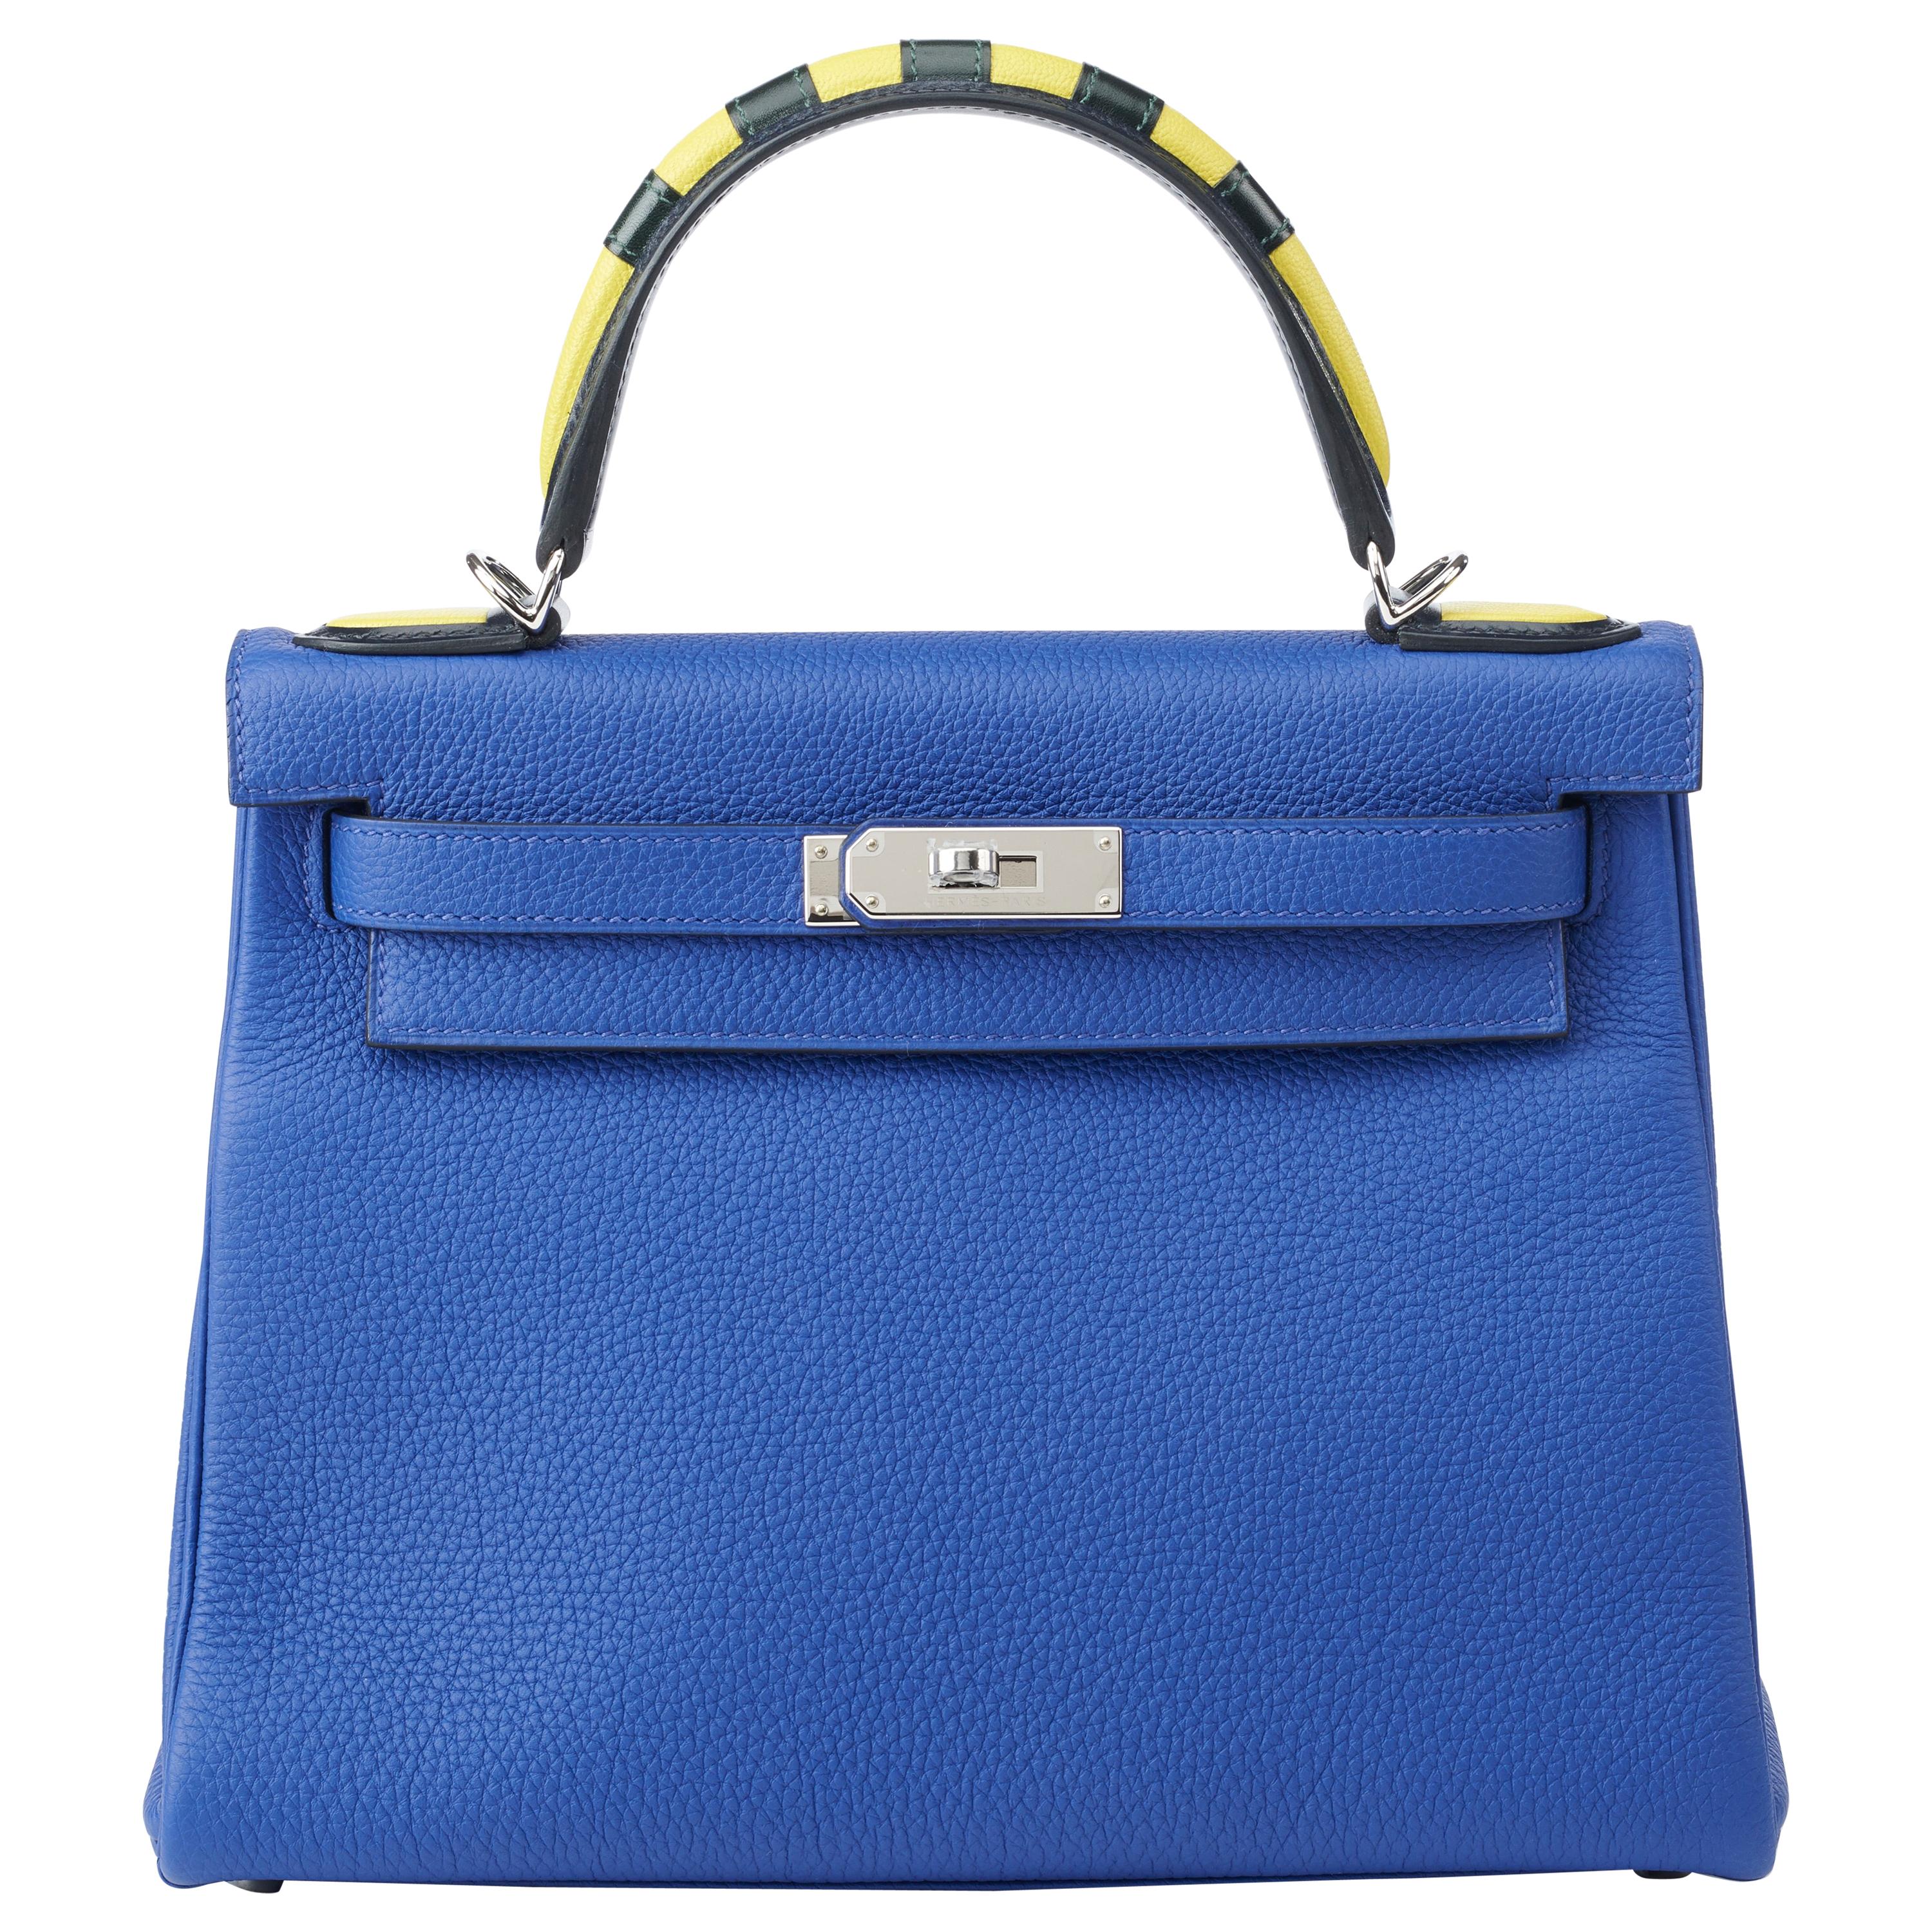 Hermes Kelly 28cm "Au Trot" Blue Electric with Gold